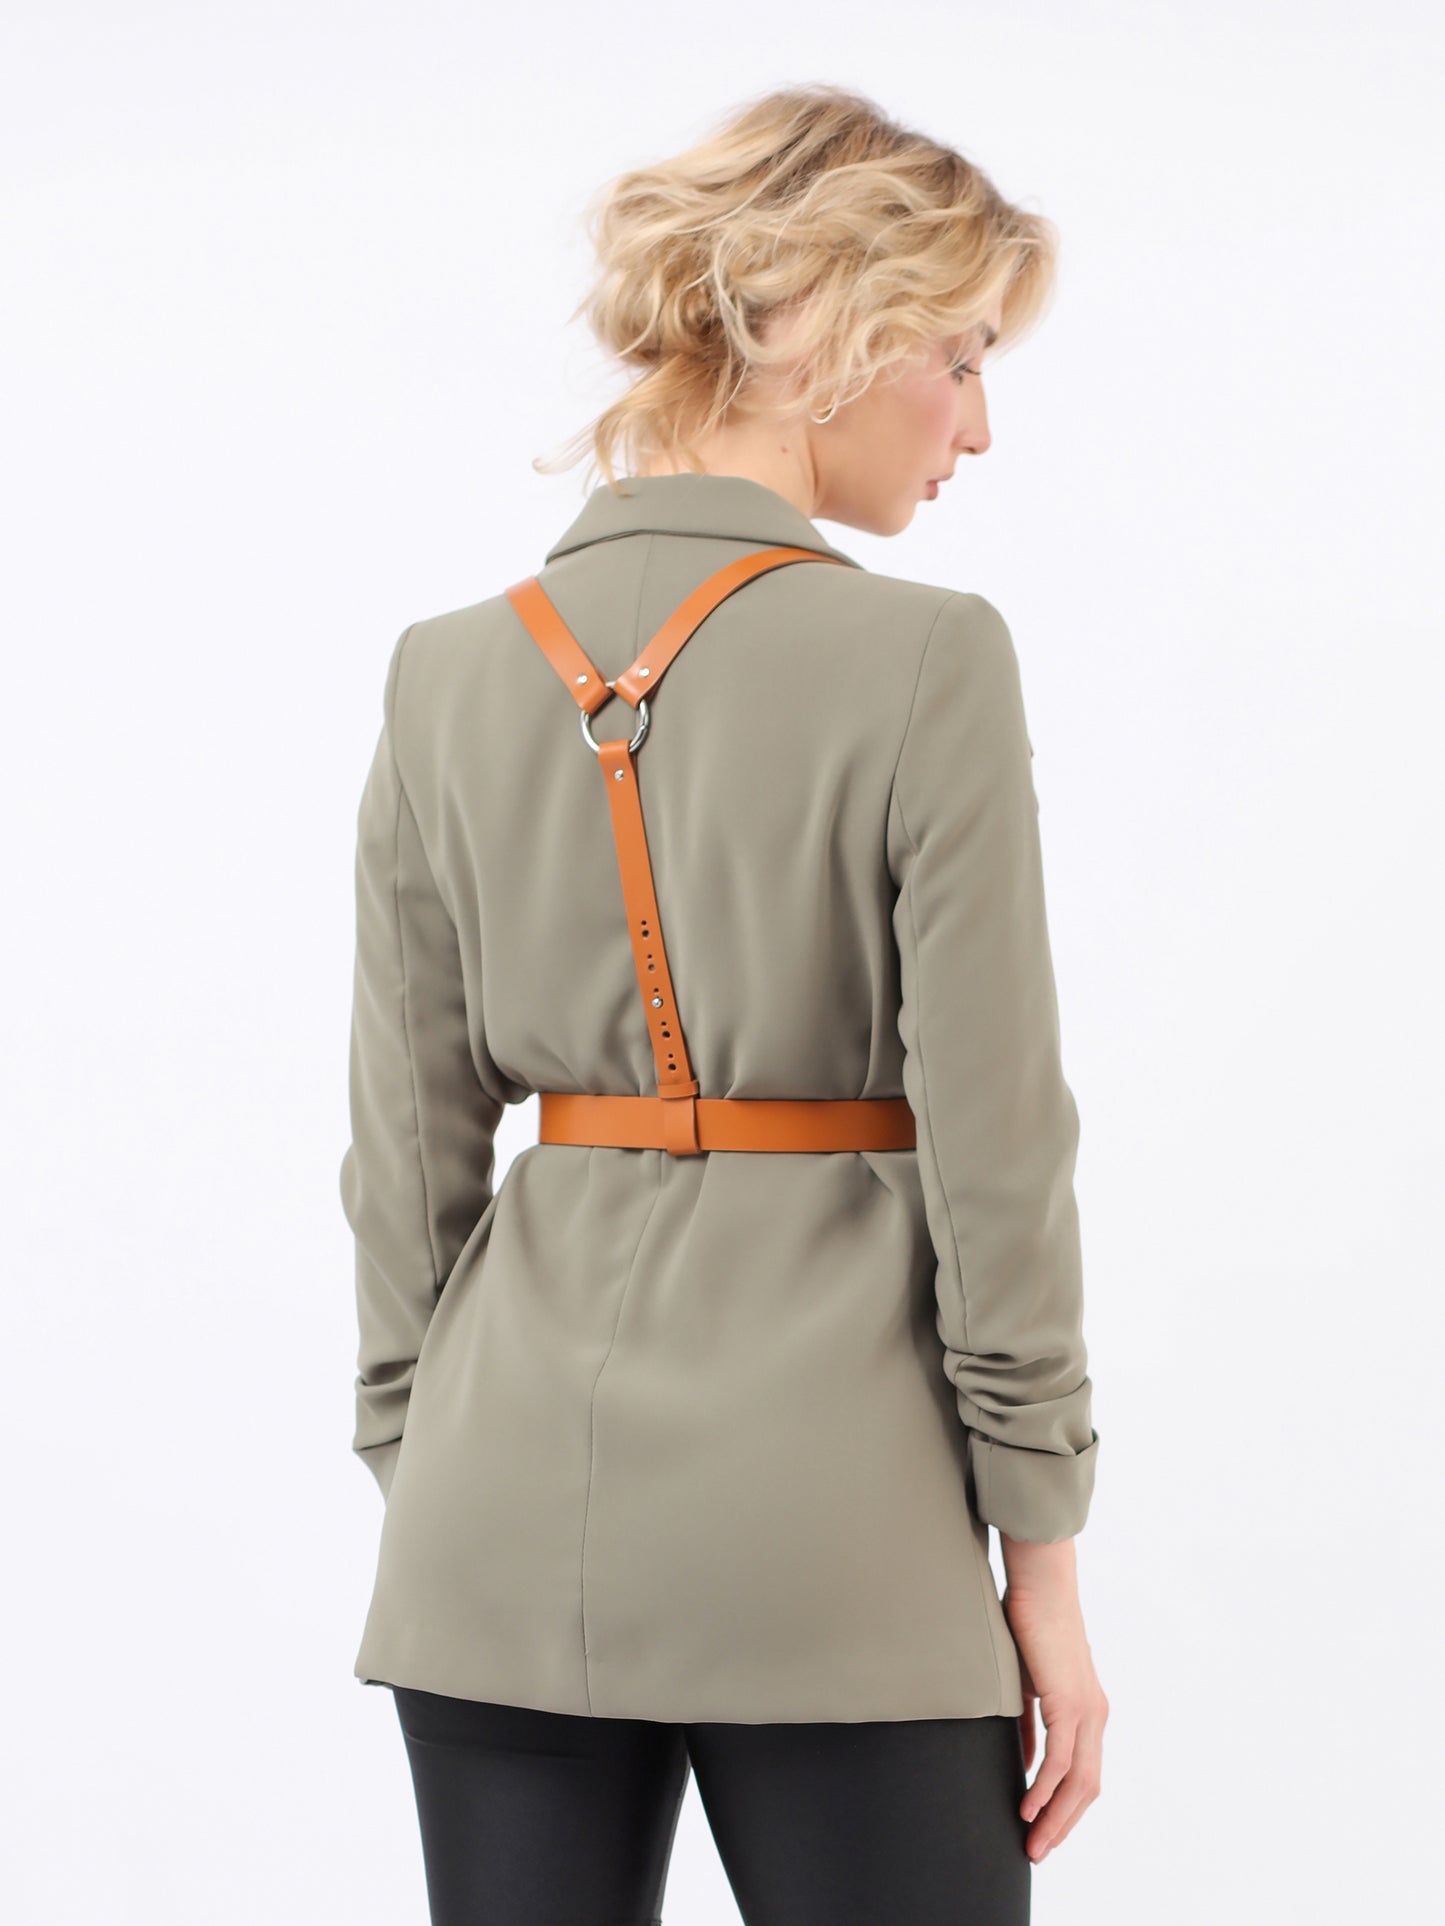 Back view of brown double bag harness.